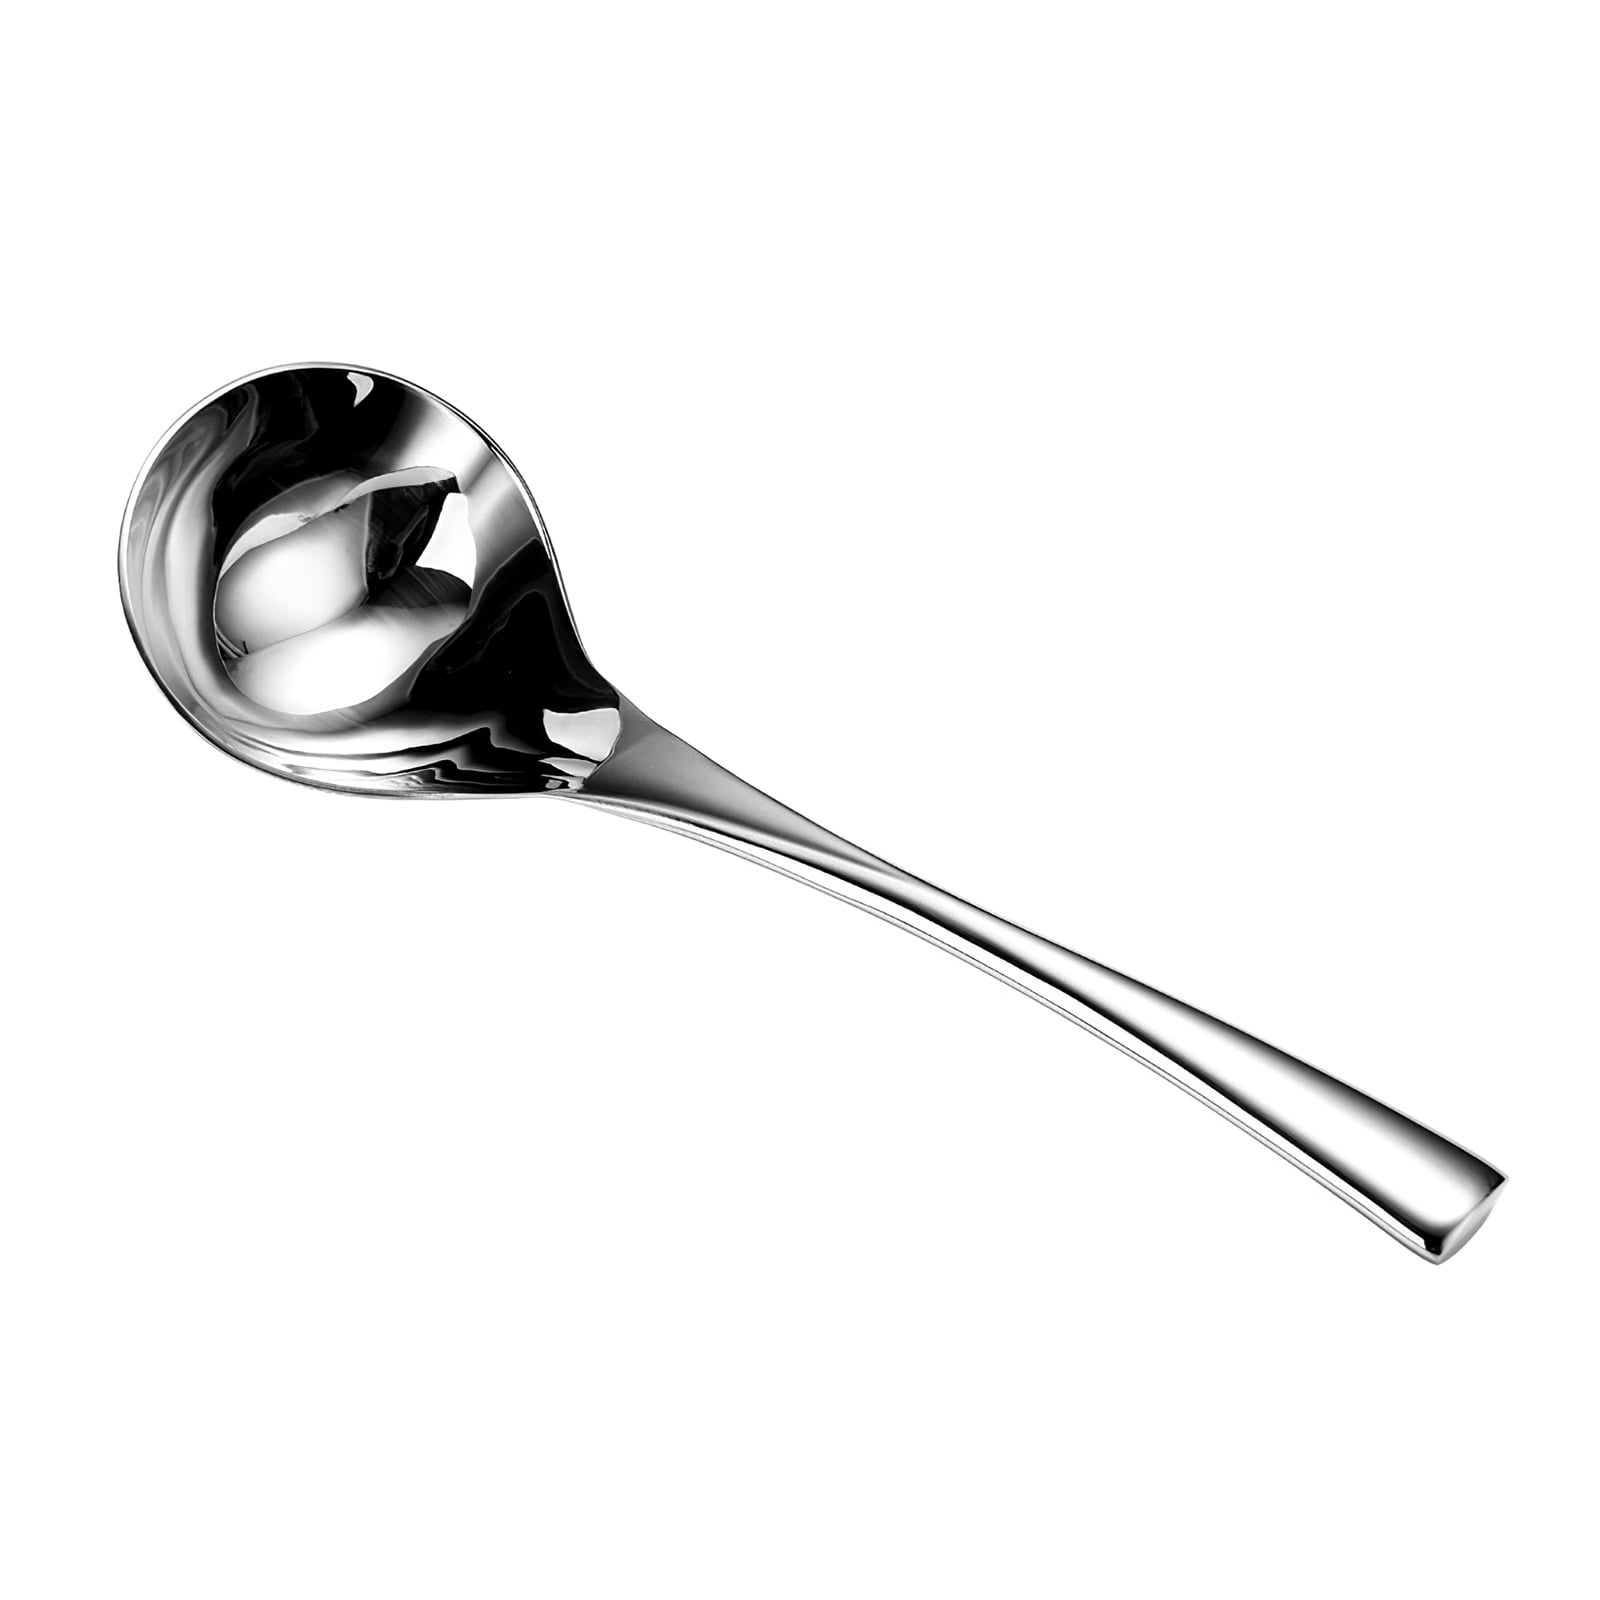 Professional Serving Spoon With Hanging Holes Stainless Steel Polished Spoons